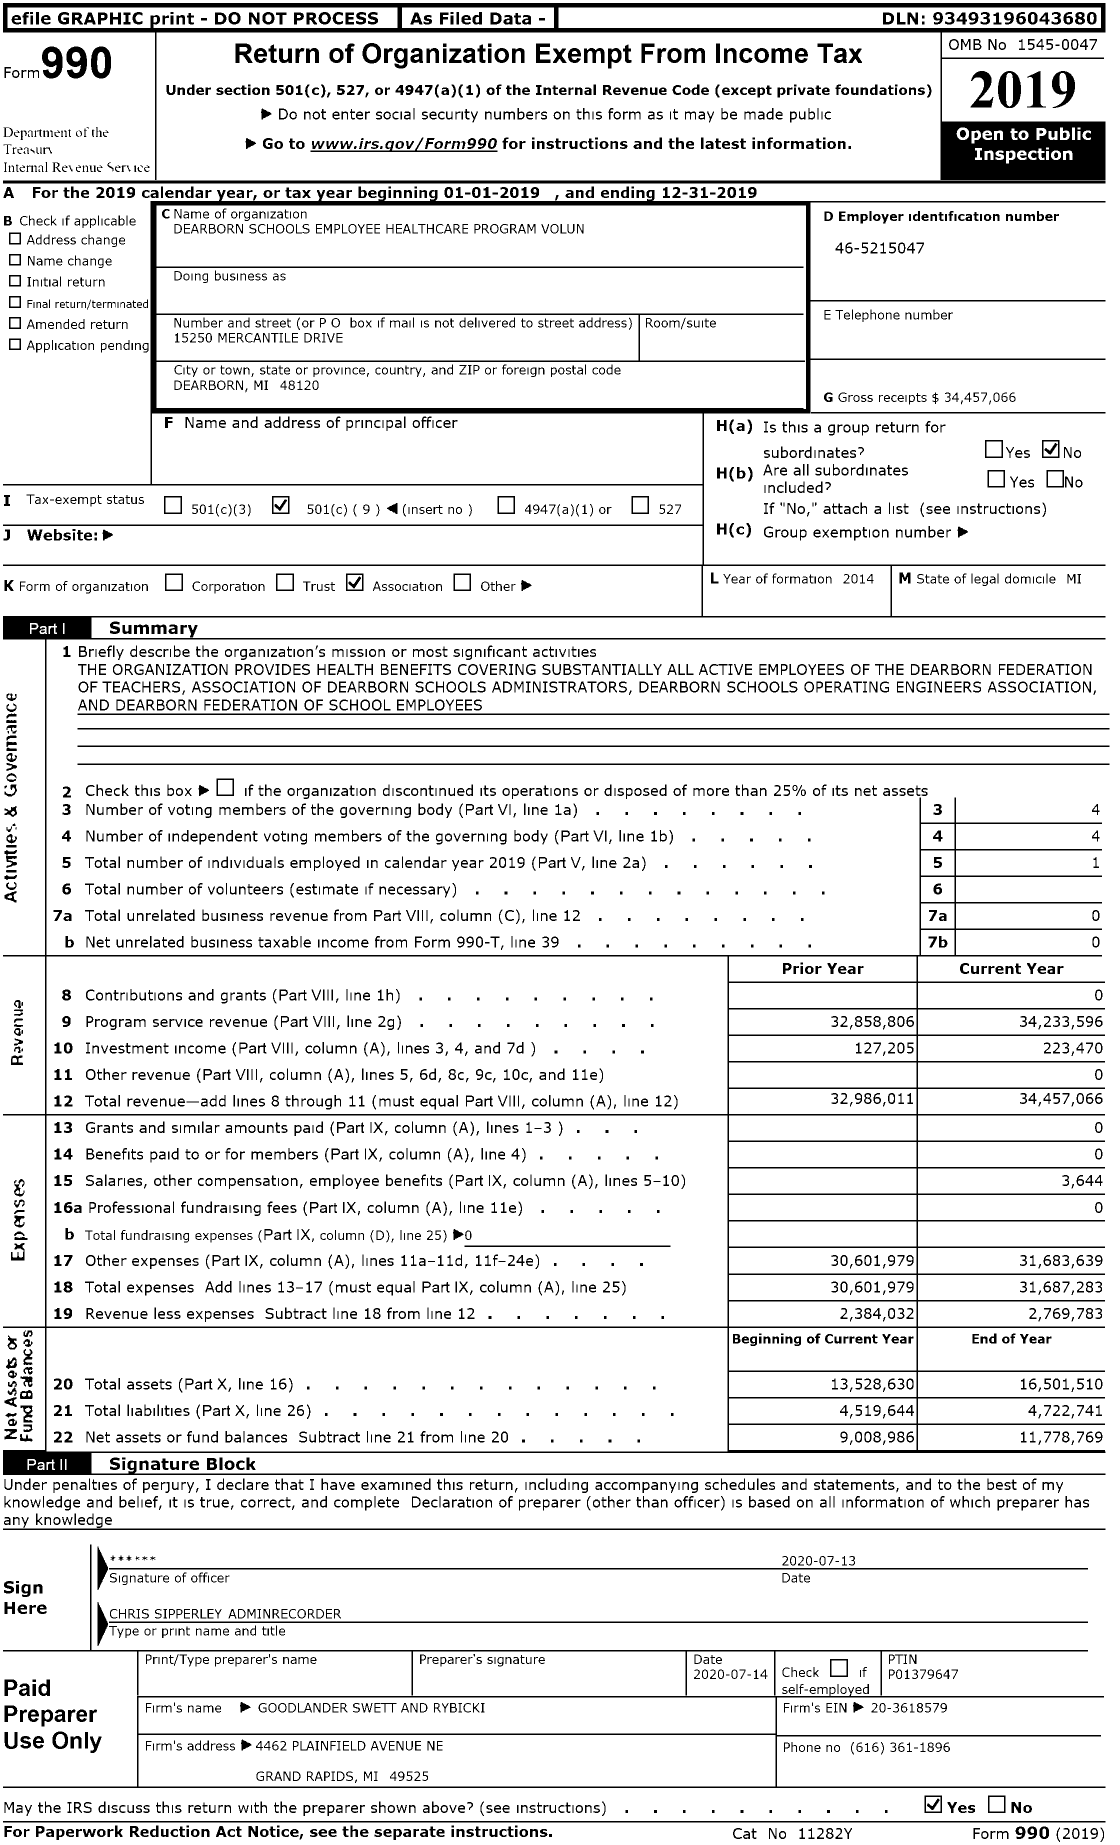 Image of first page of 2019 Form 990O for Dearborn Schools Employee Healthcare Program Volun